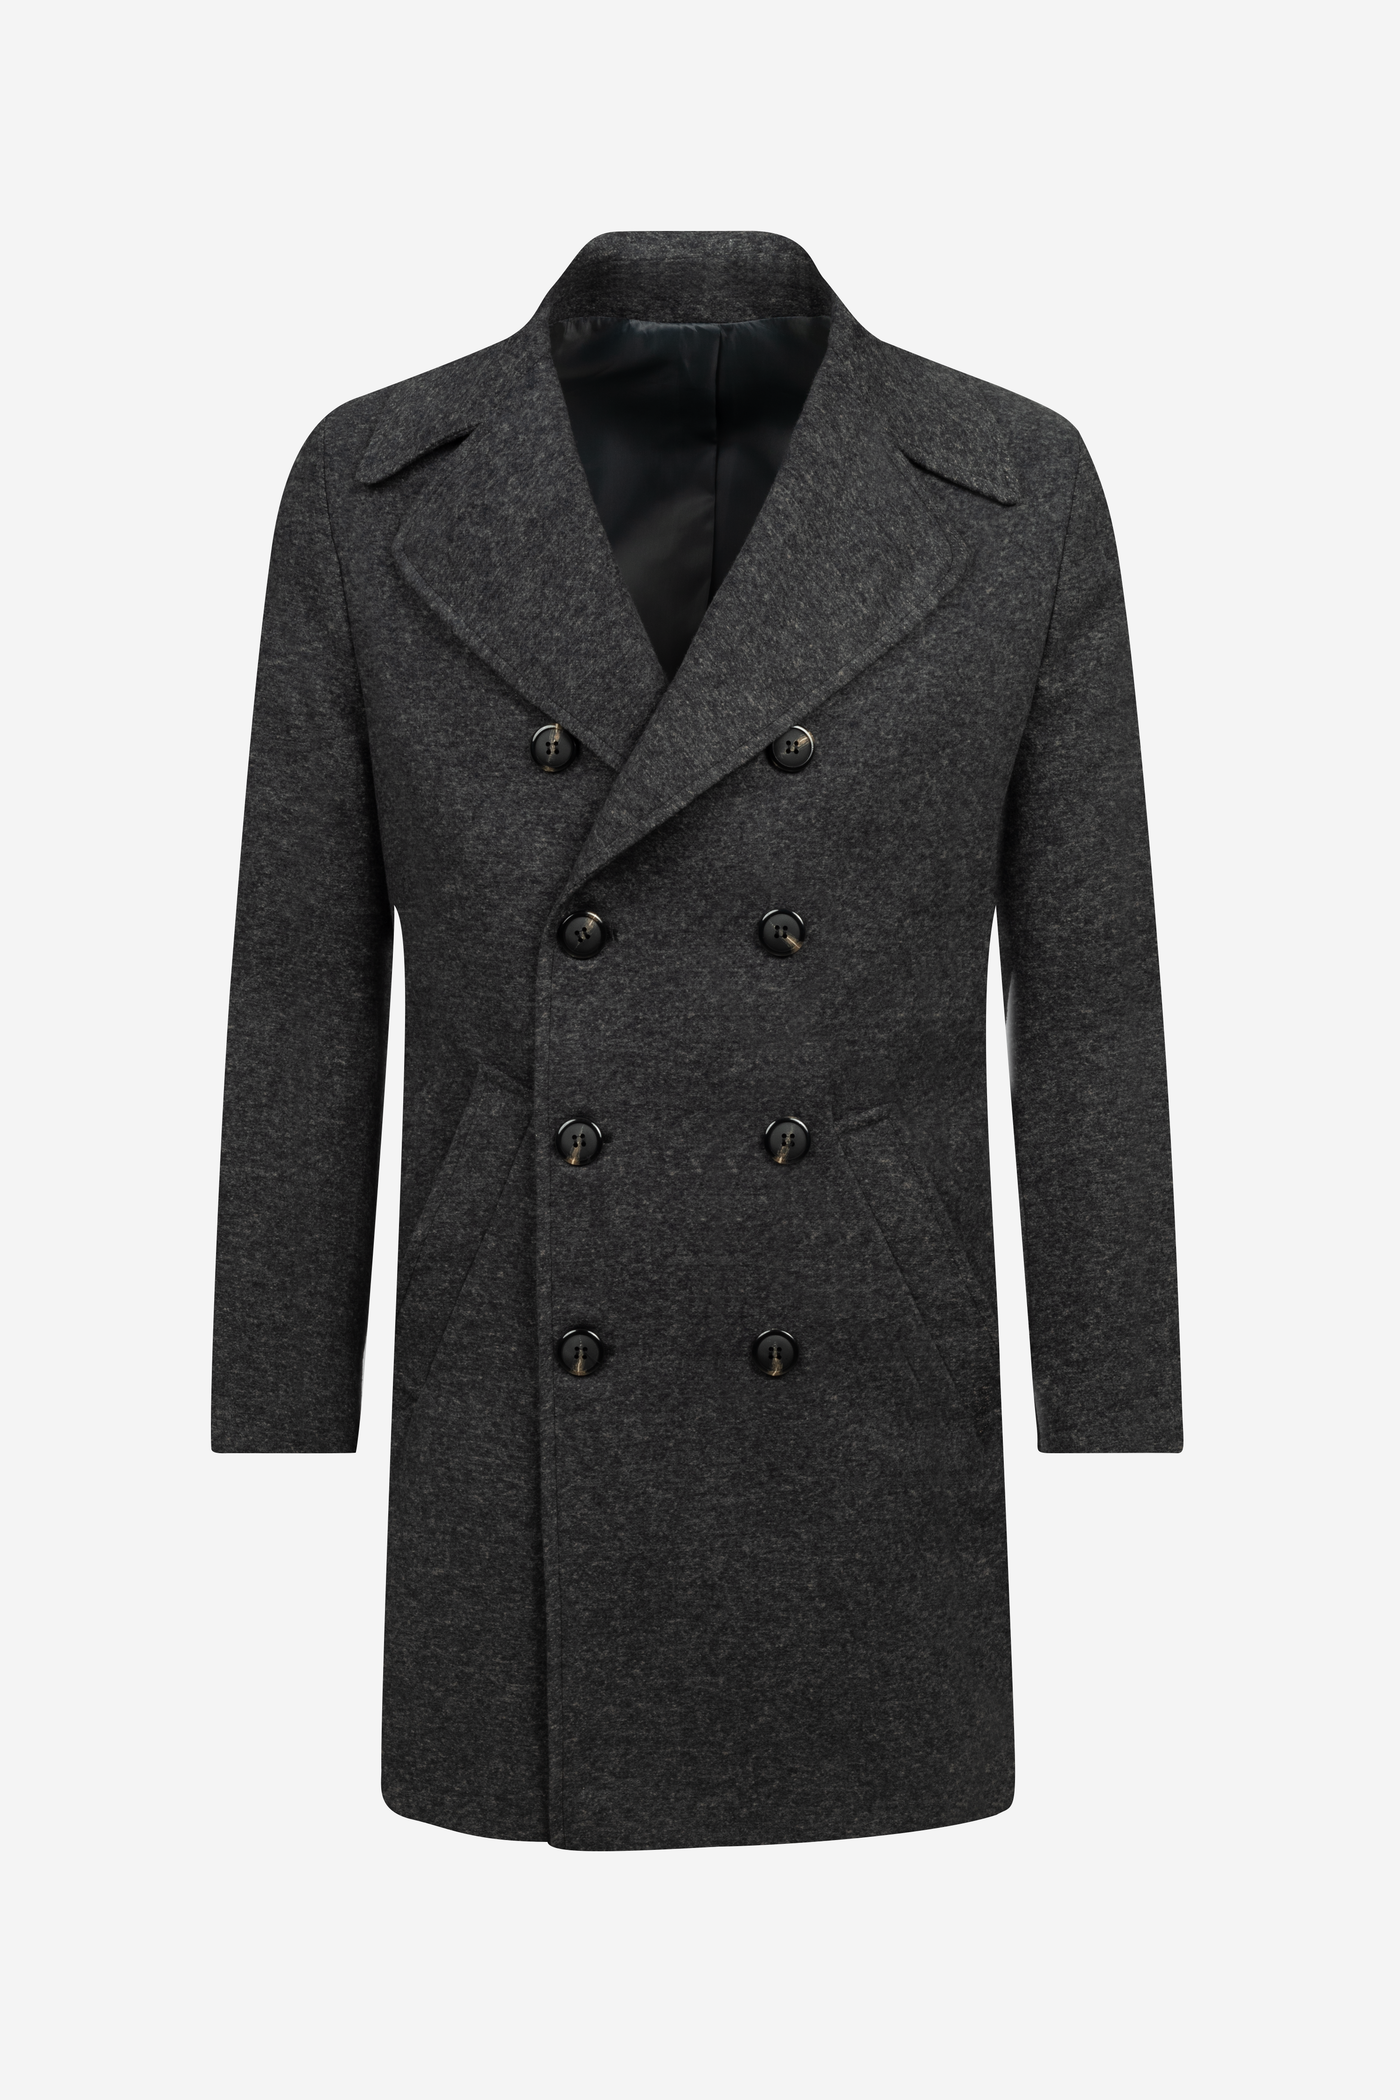 Jet Black Double-Breasted Poly Coat